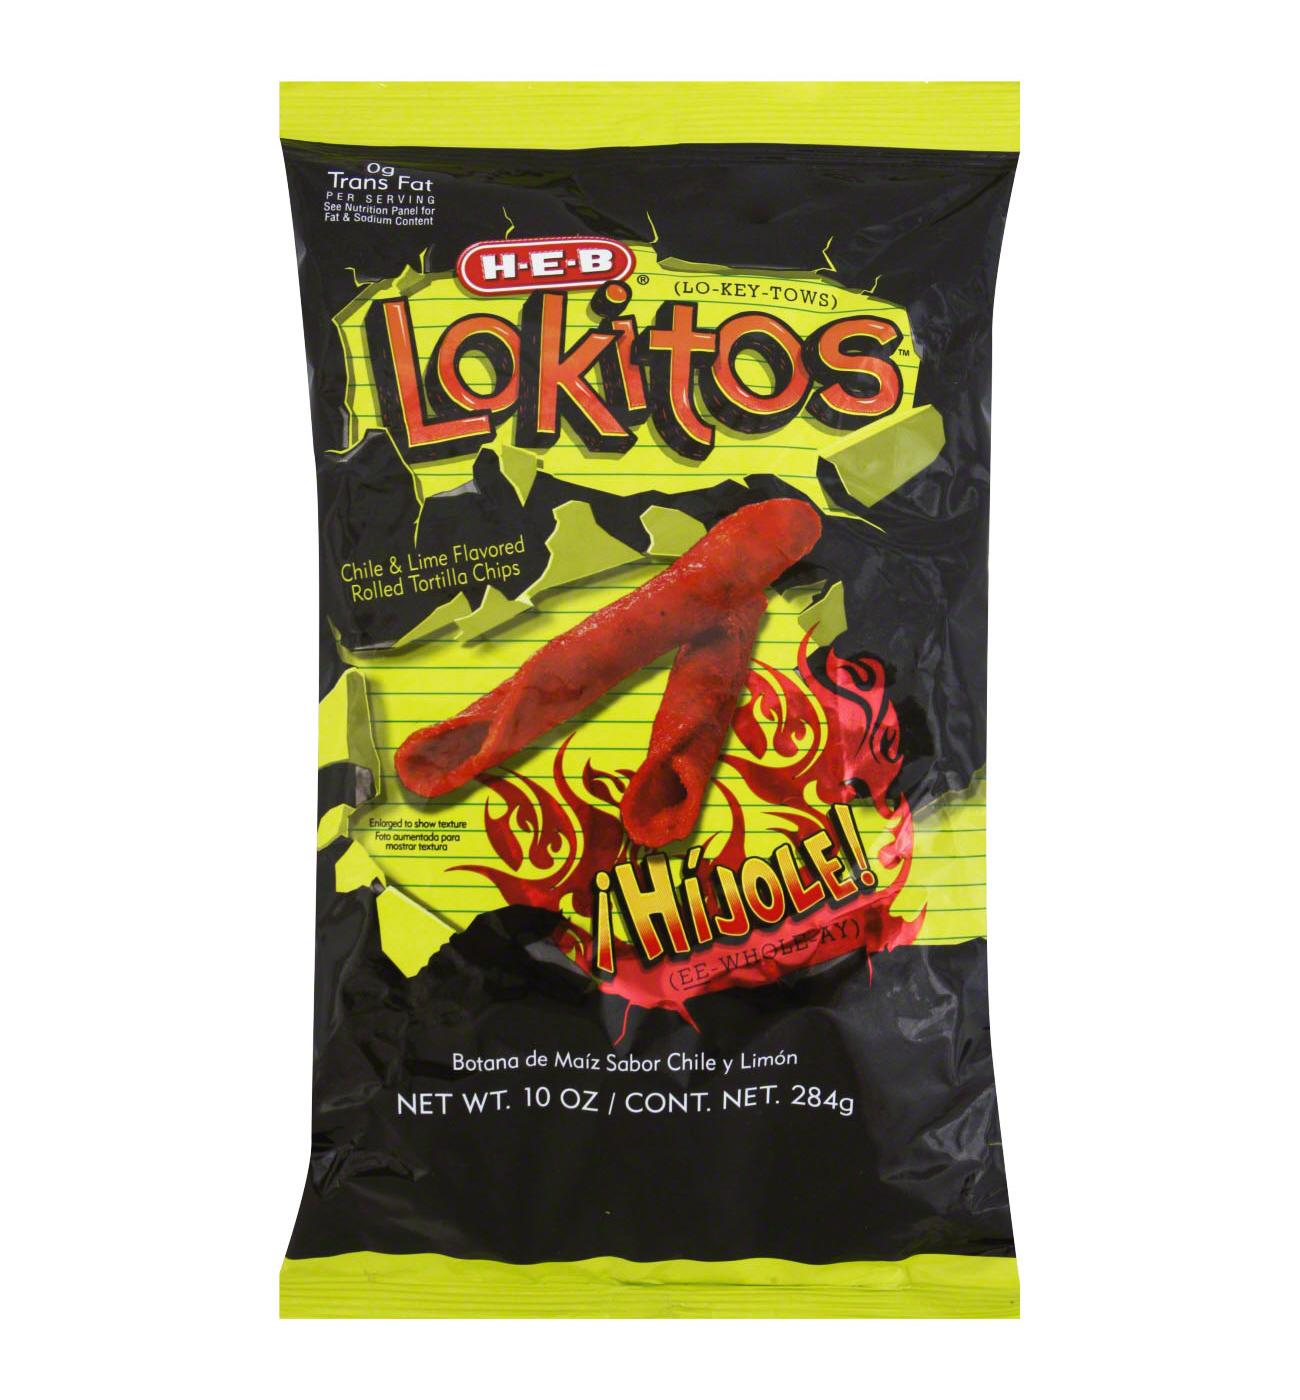 H-E-B Lokitos Hijole Chile & Lime Rolled Tortilla Chips; image 1 of 2